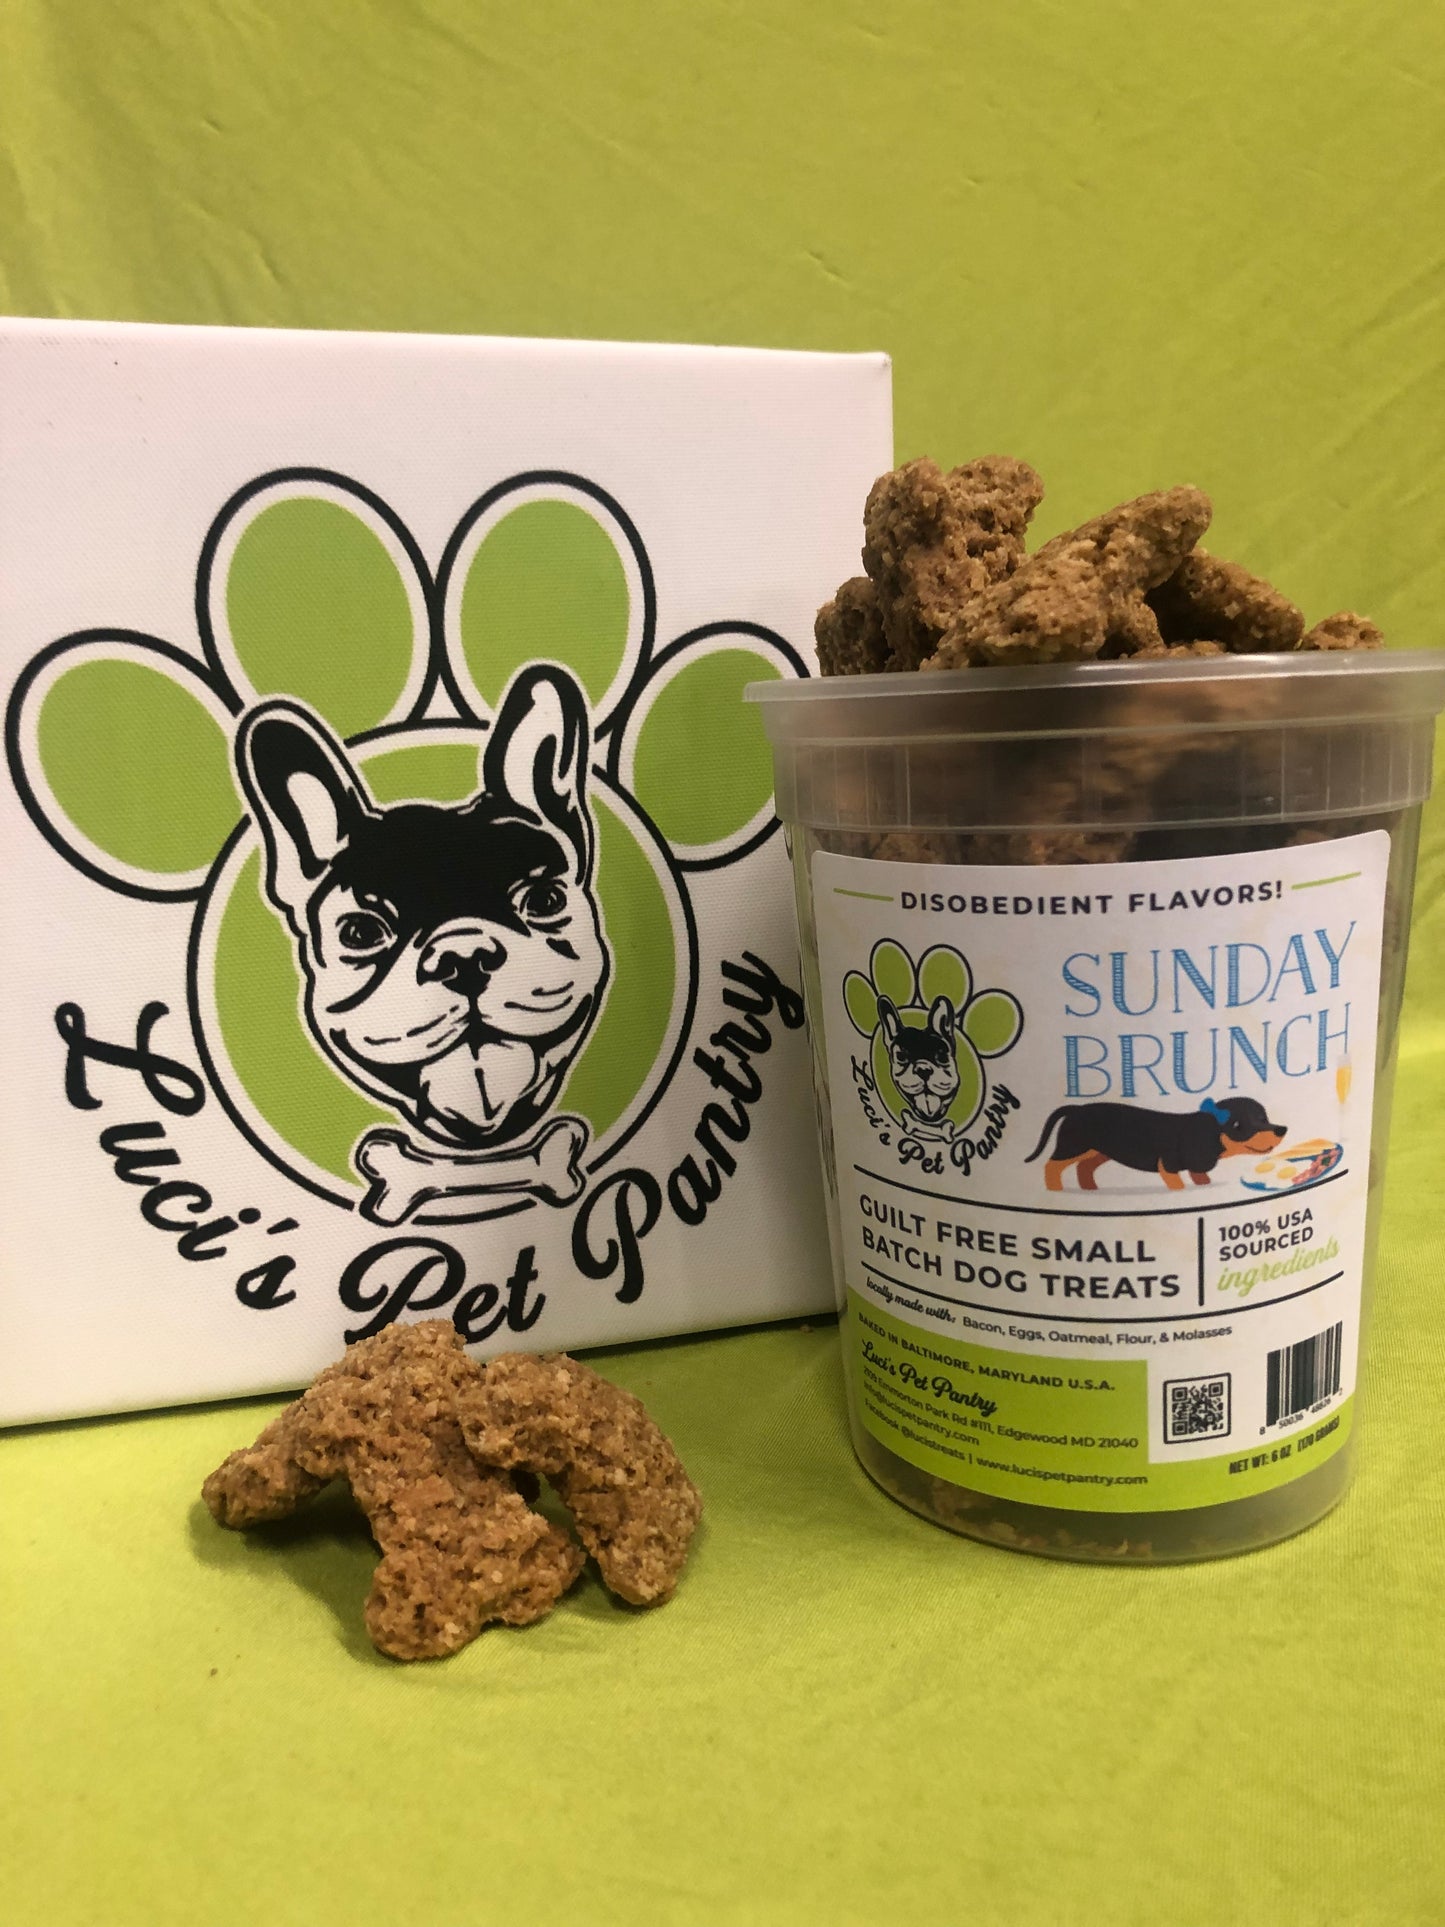 Sunday Brunch - All Natural "Bacon & Eggs" Dog & Puppy Treats - Disobedient Tub of Biscuits